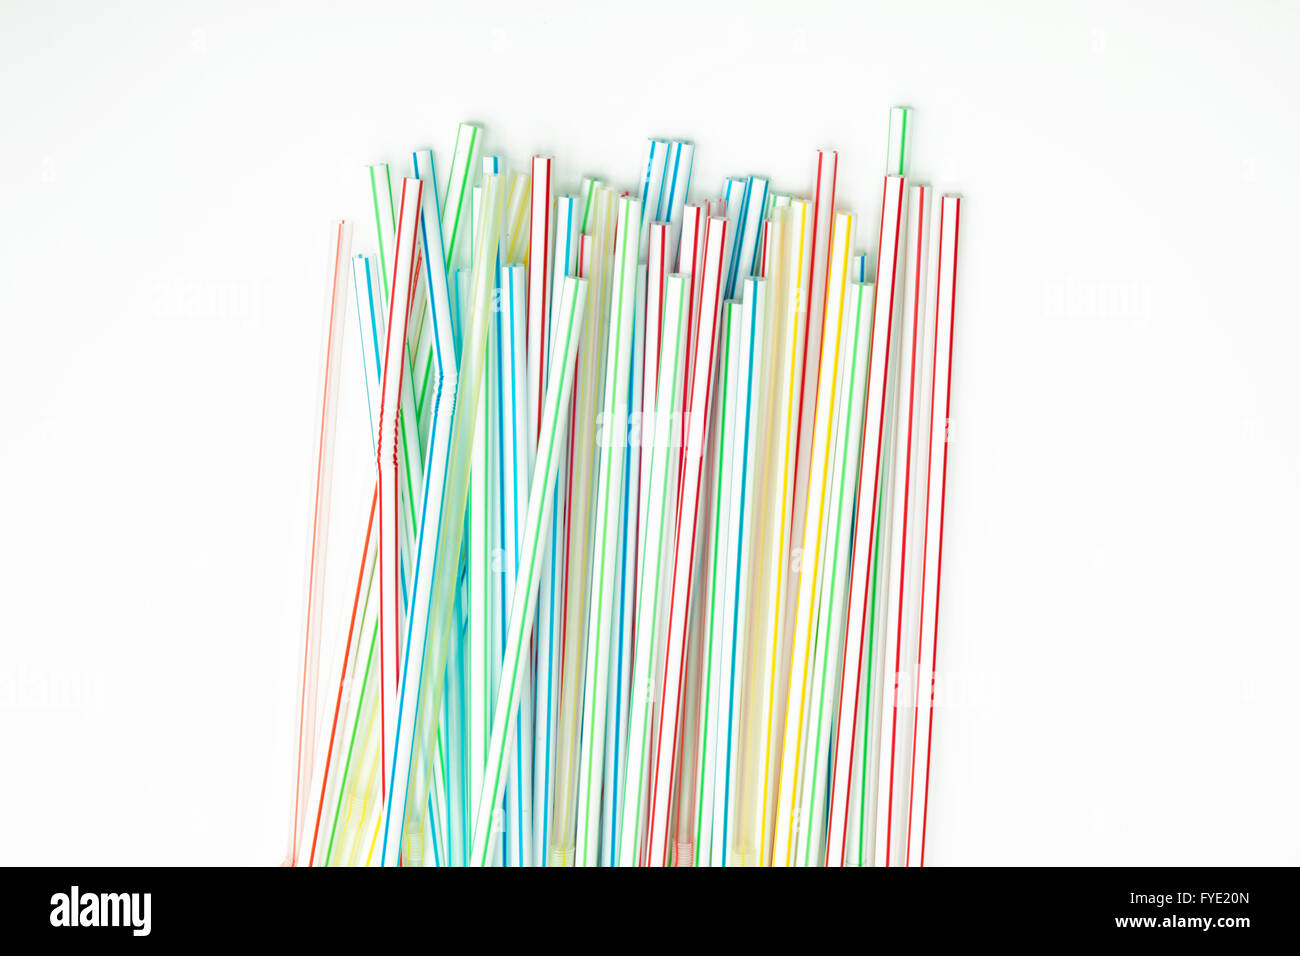 https://c8.alamy.com/comp/FYE20N/detail-of-group-of-colorful-drinking-straws-with-isolated-background-FYE20N.jpg